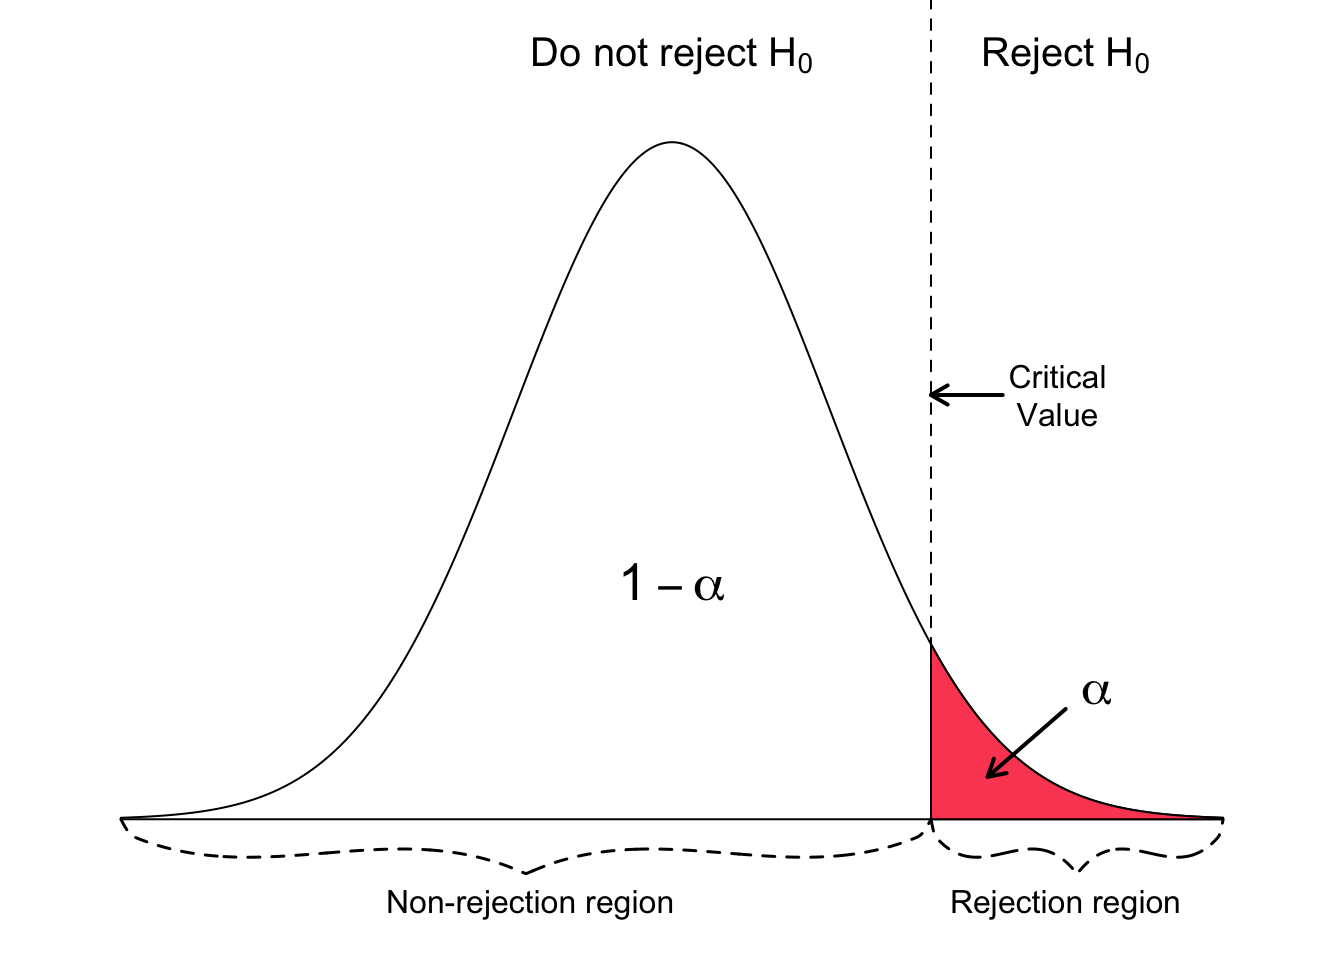 Generalized illustration of the rejection and non-rejection areas of a one-sided, right-tailed test